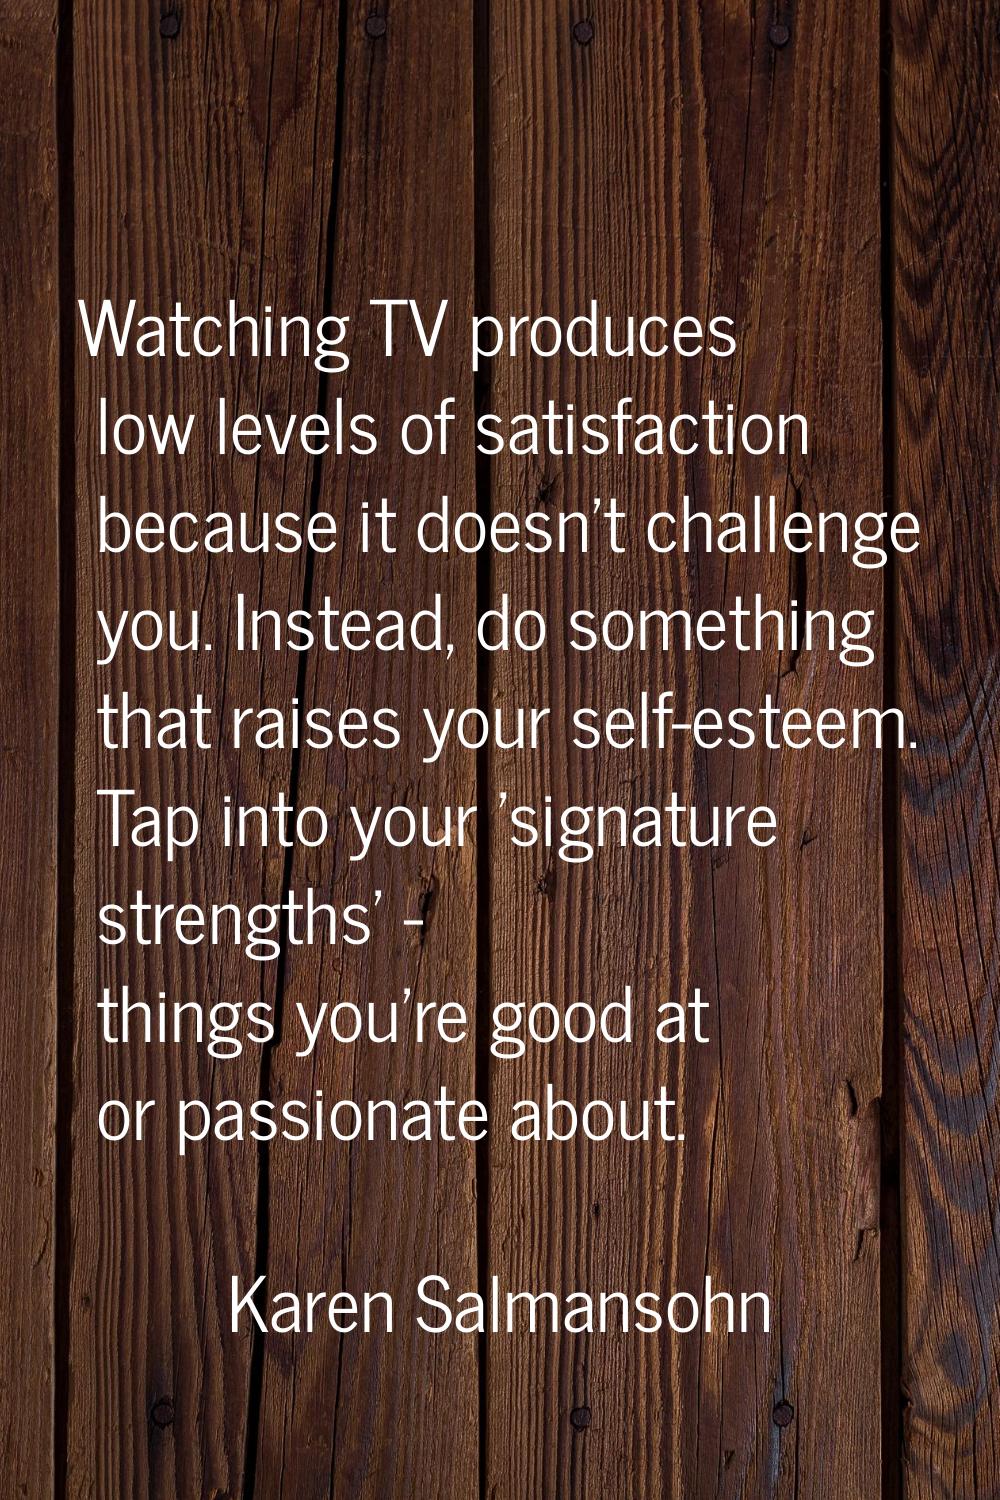 Watching TV produces low levels of satisfaction because it doesn't challenge you. Instead, do somet